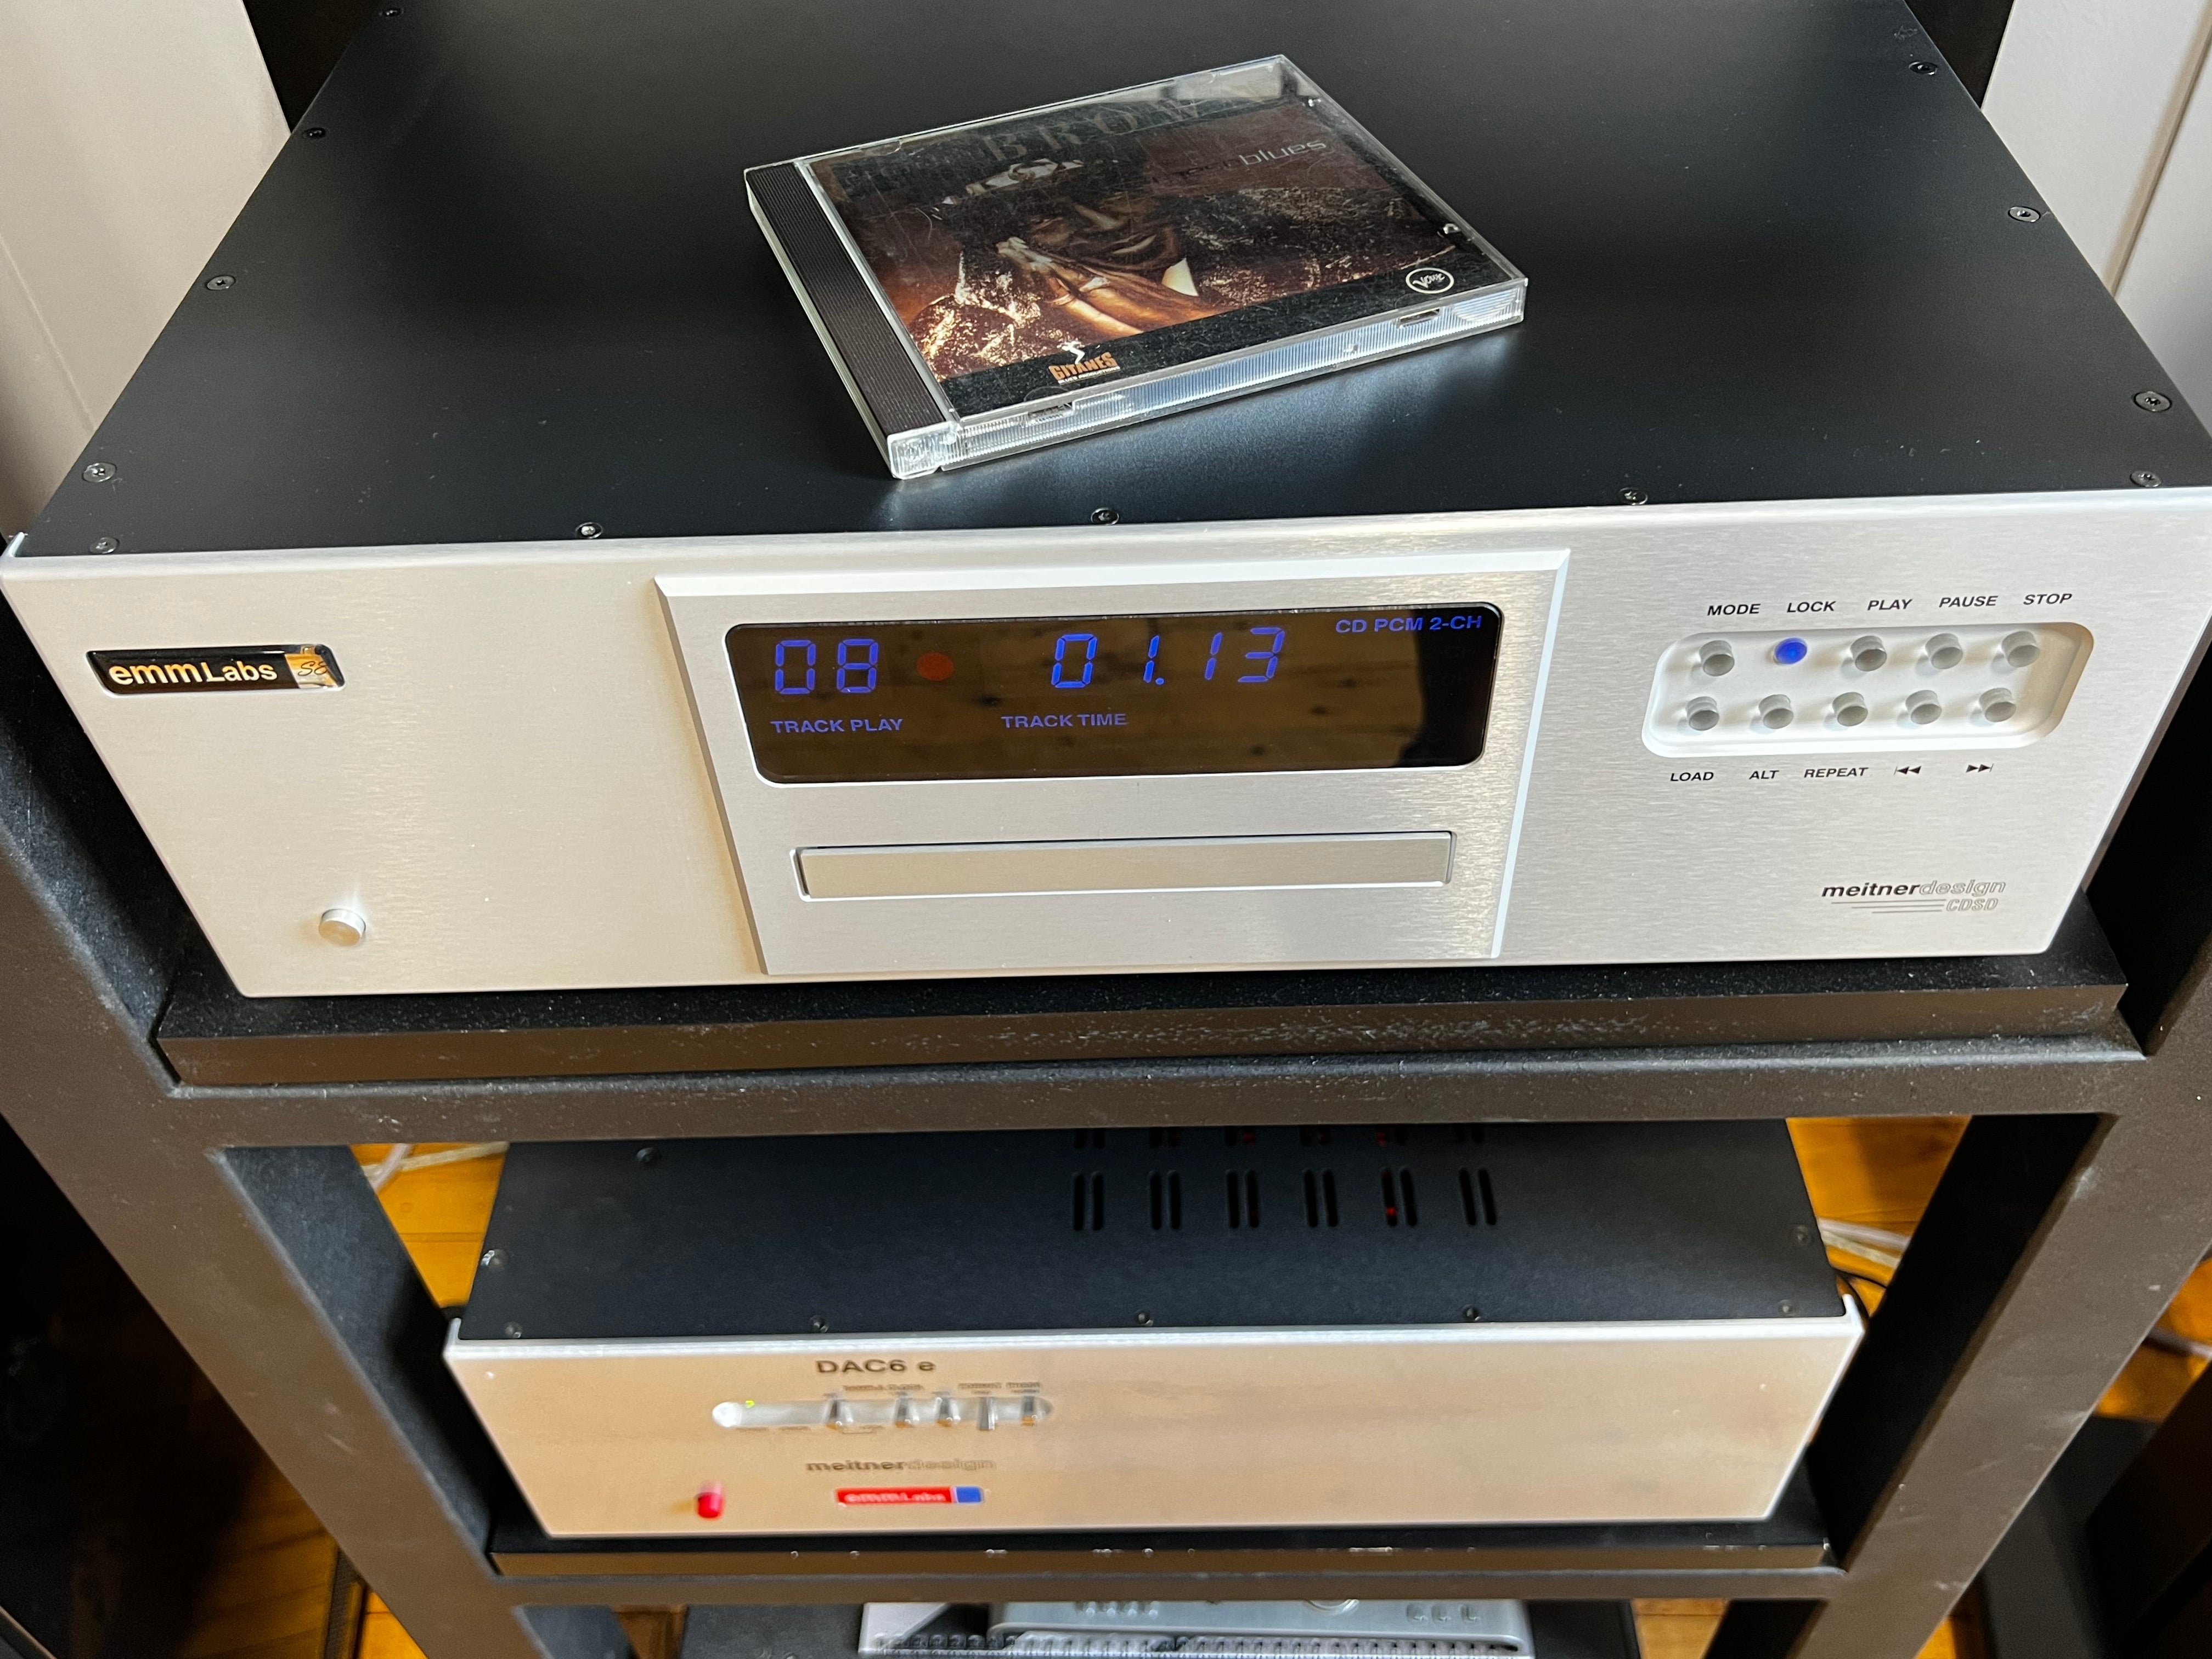 Meitner Design emmLabs CDSD/DAC6e Combo, Pure Excellence